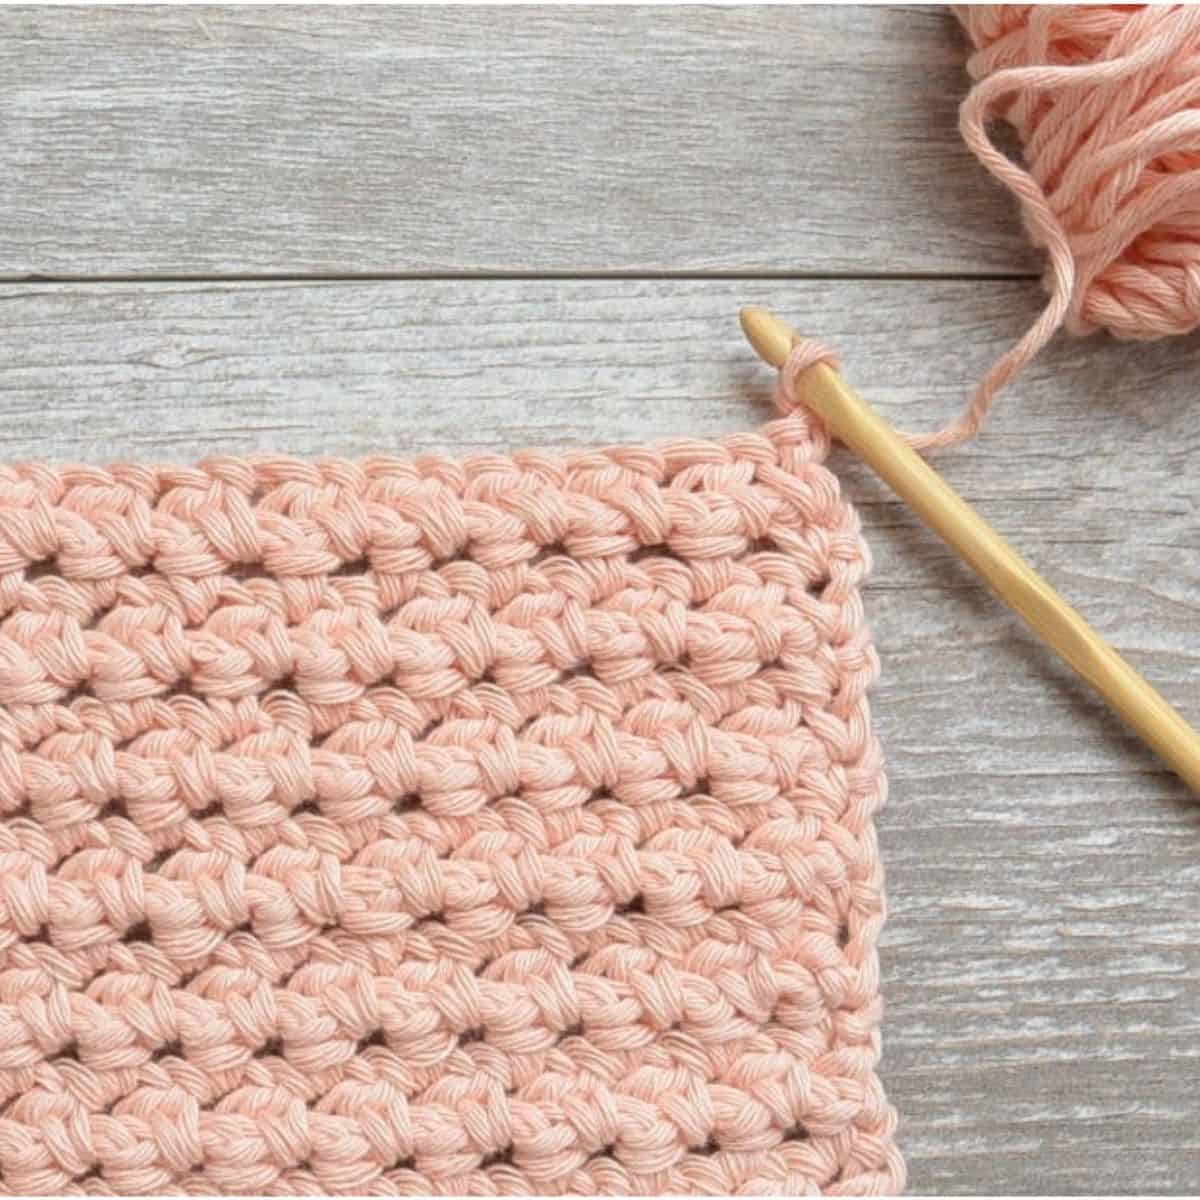 soft pink crochet stitch swatch with hook and yarn